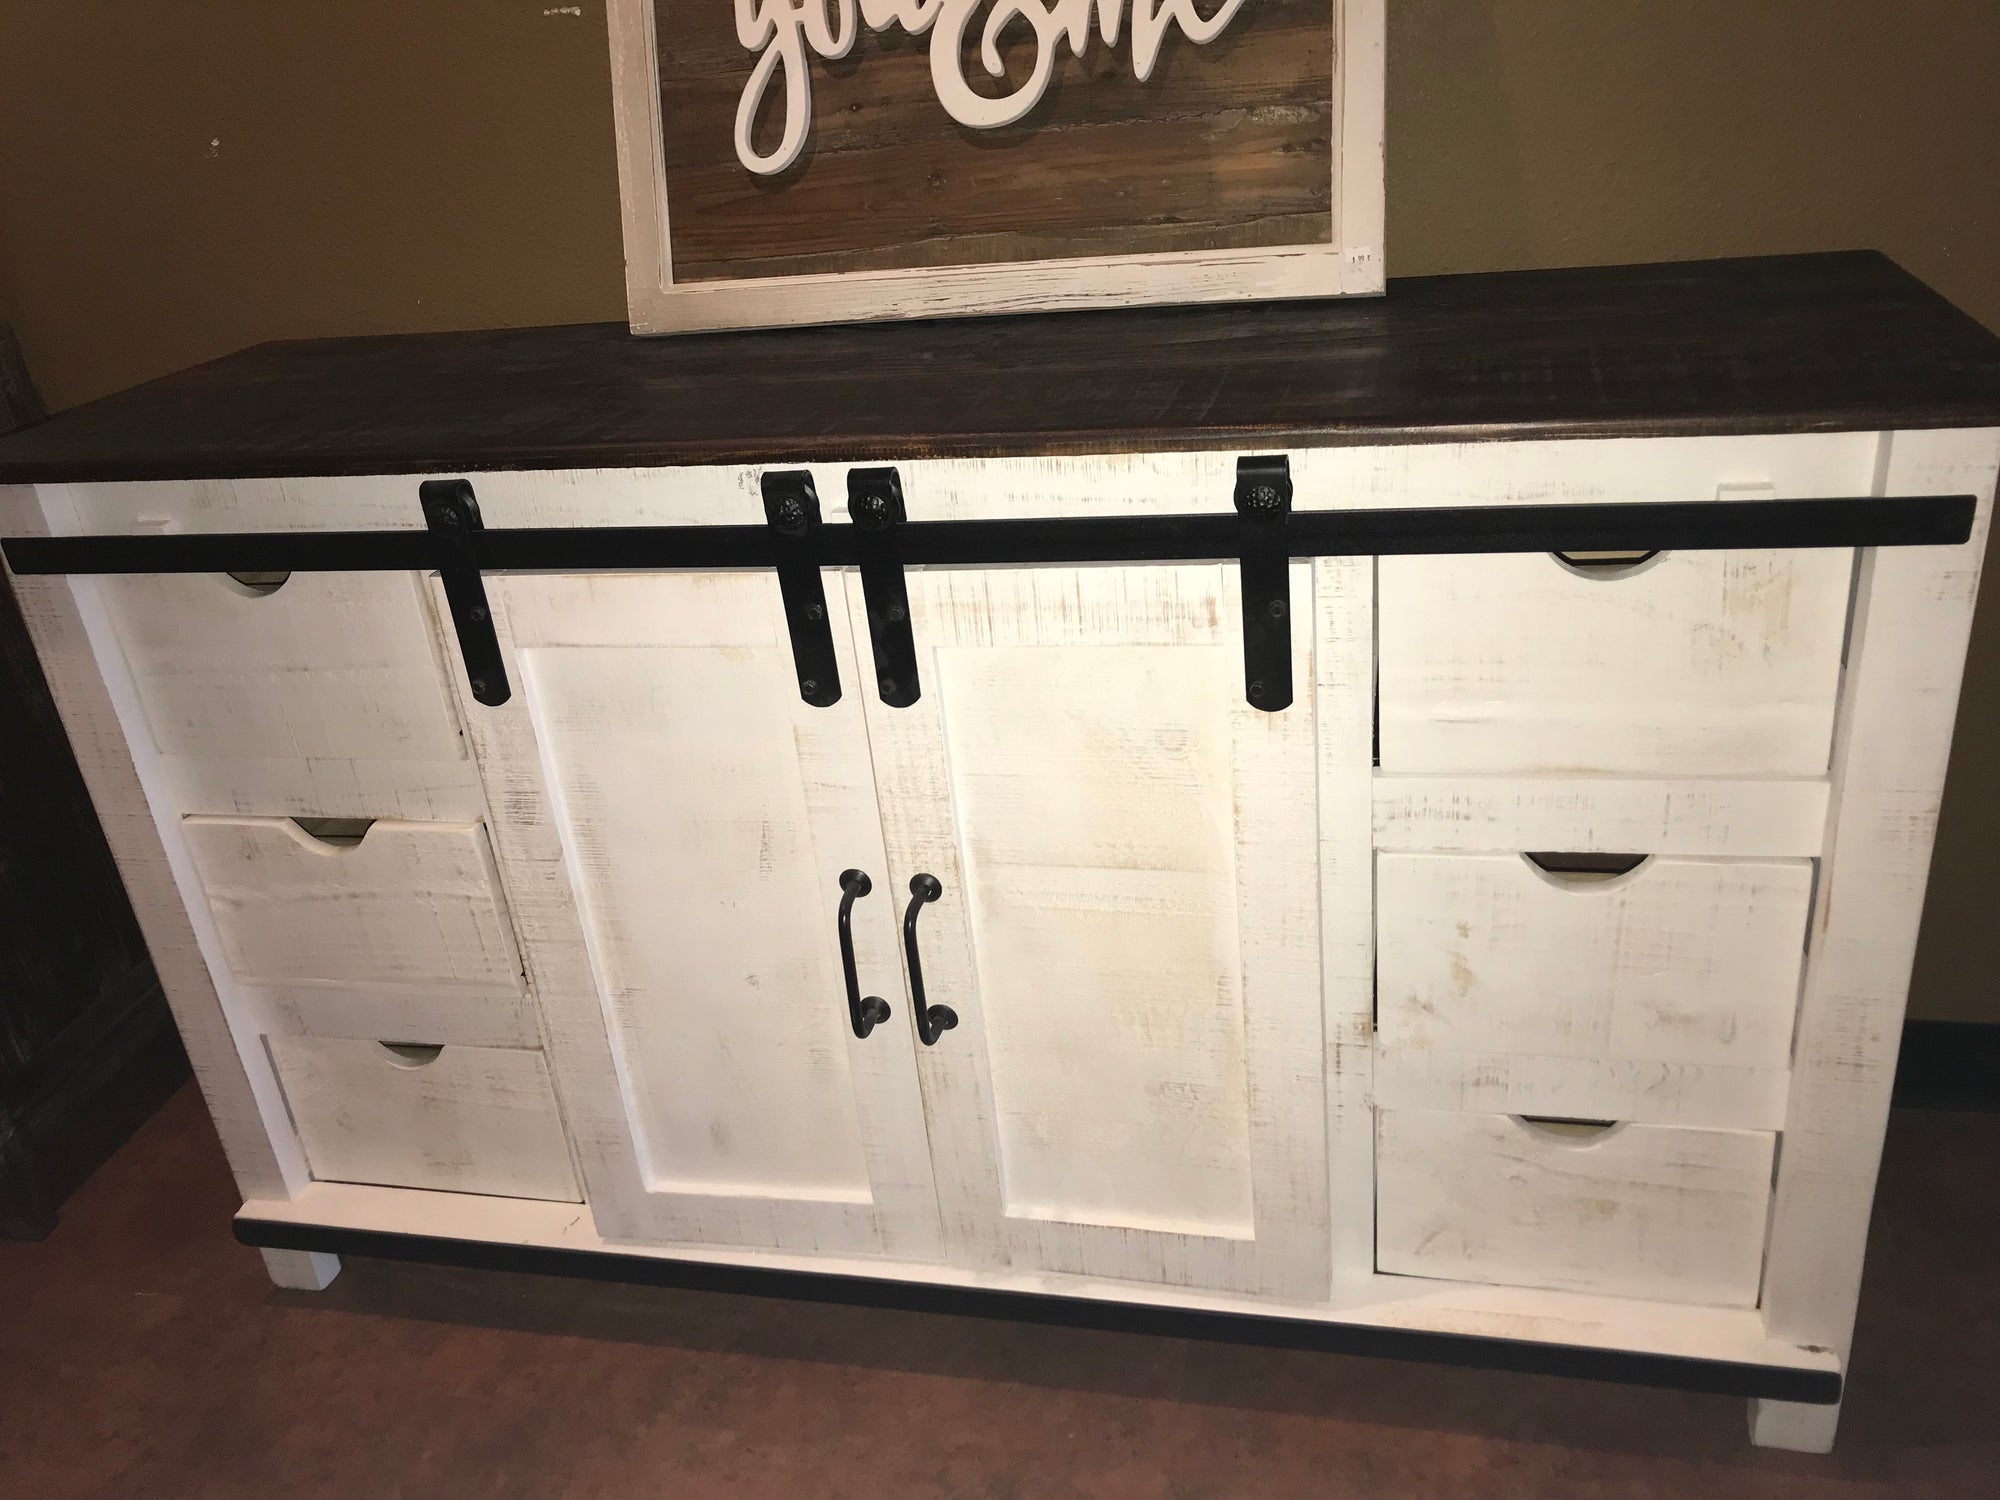 Jon420-FI 60" TV Stand  with Barn Doors and 6 Drawers in Rustic White with Dark top